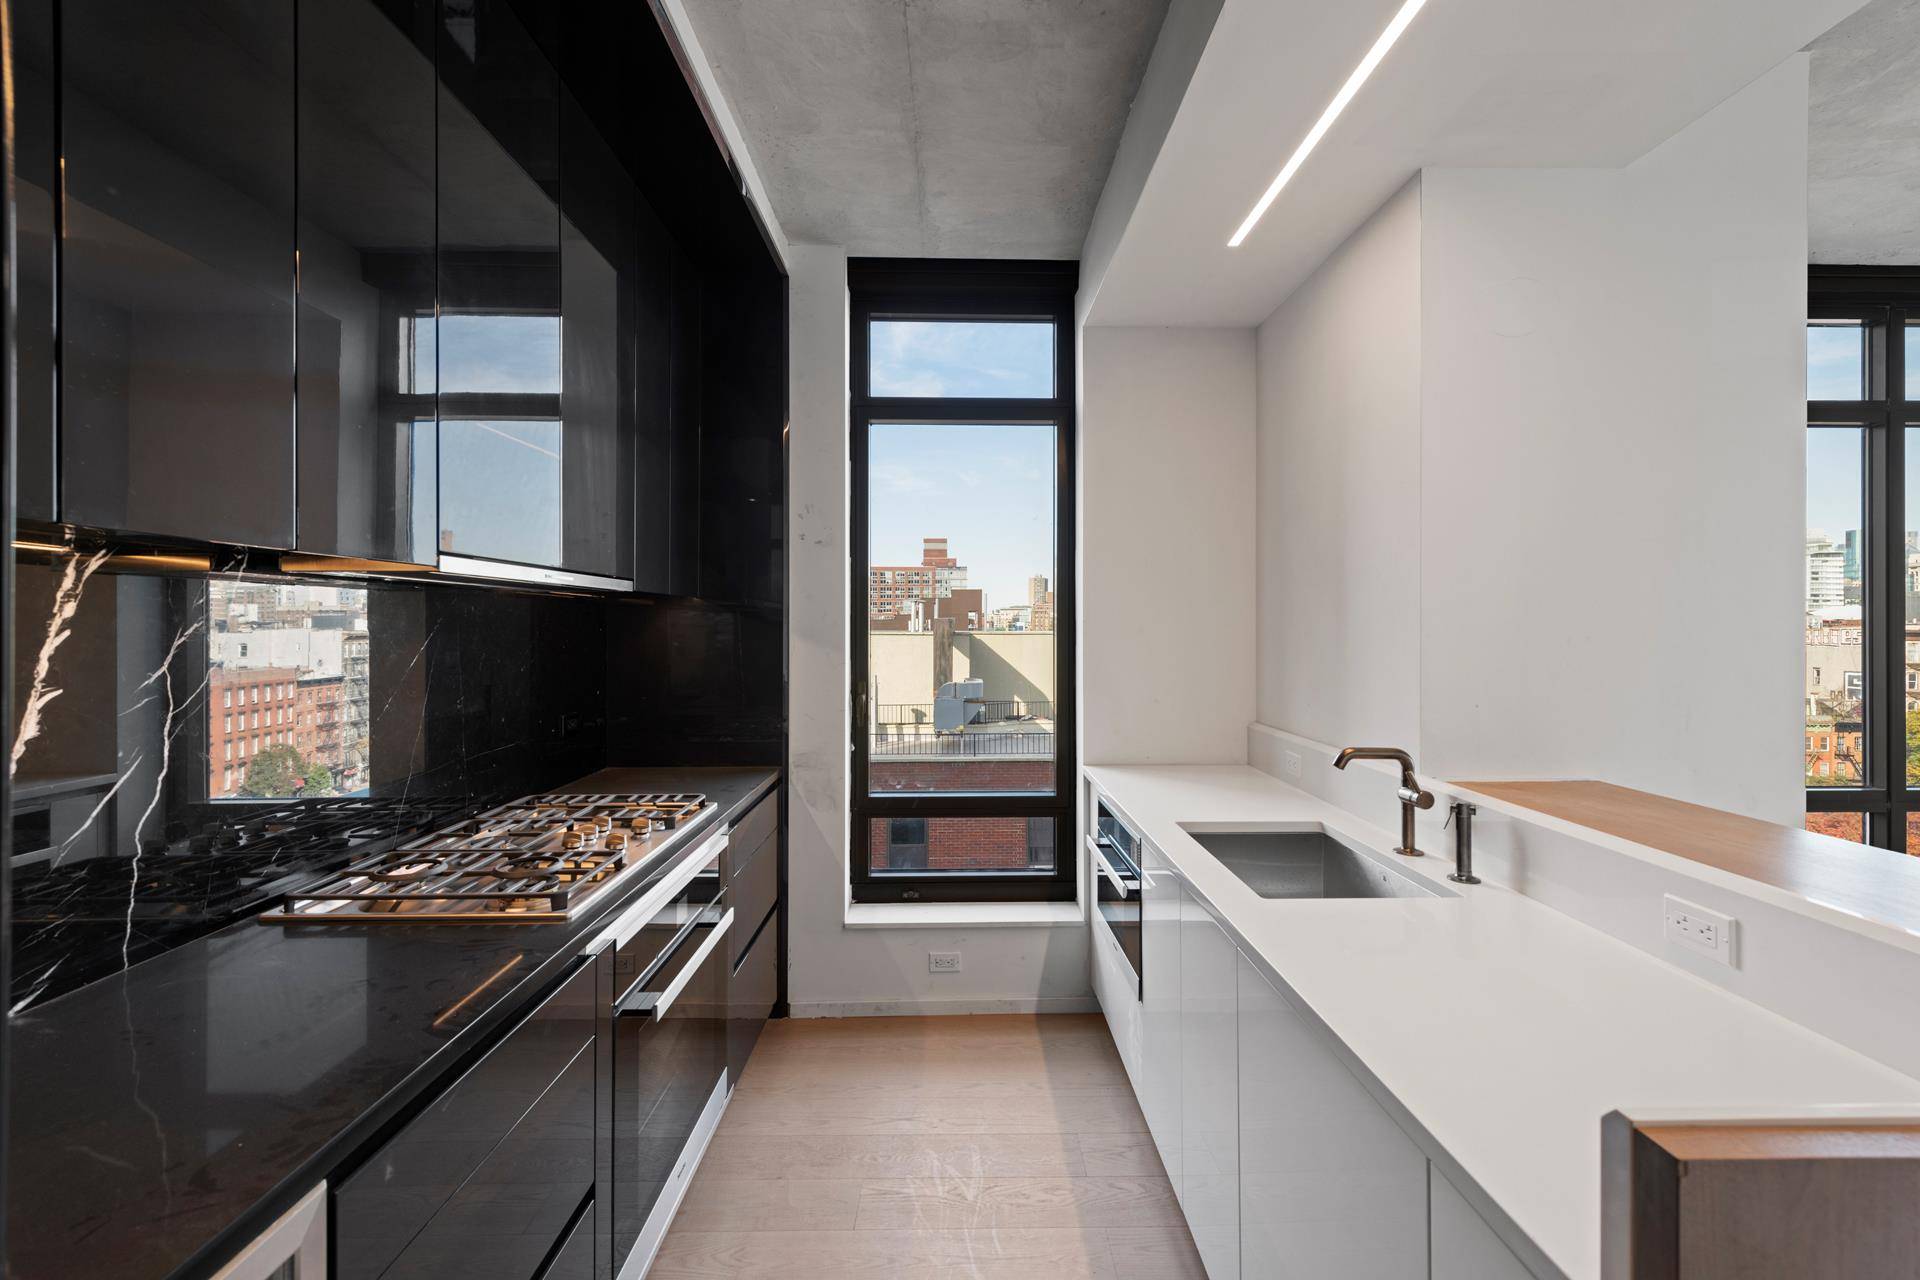 Available October 20th Welcome home to the Lower East Side's choice building, 196 Orchard Street.